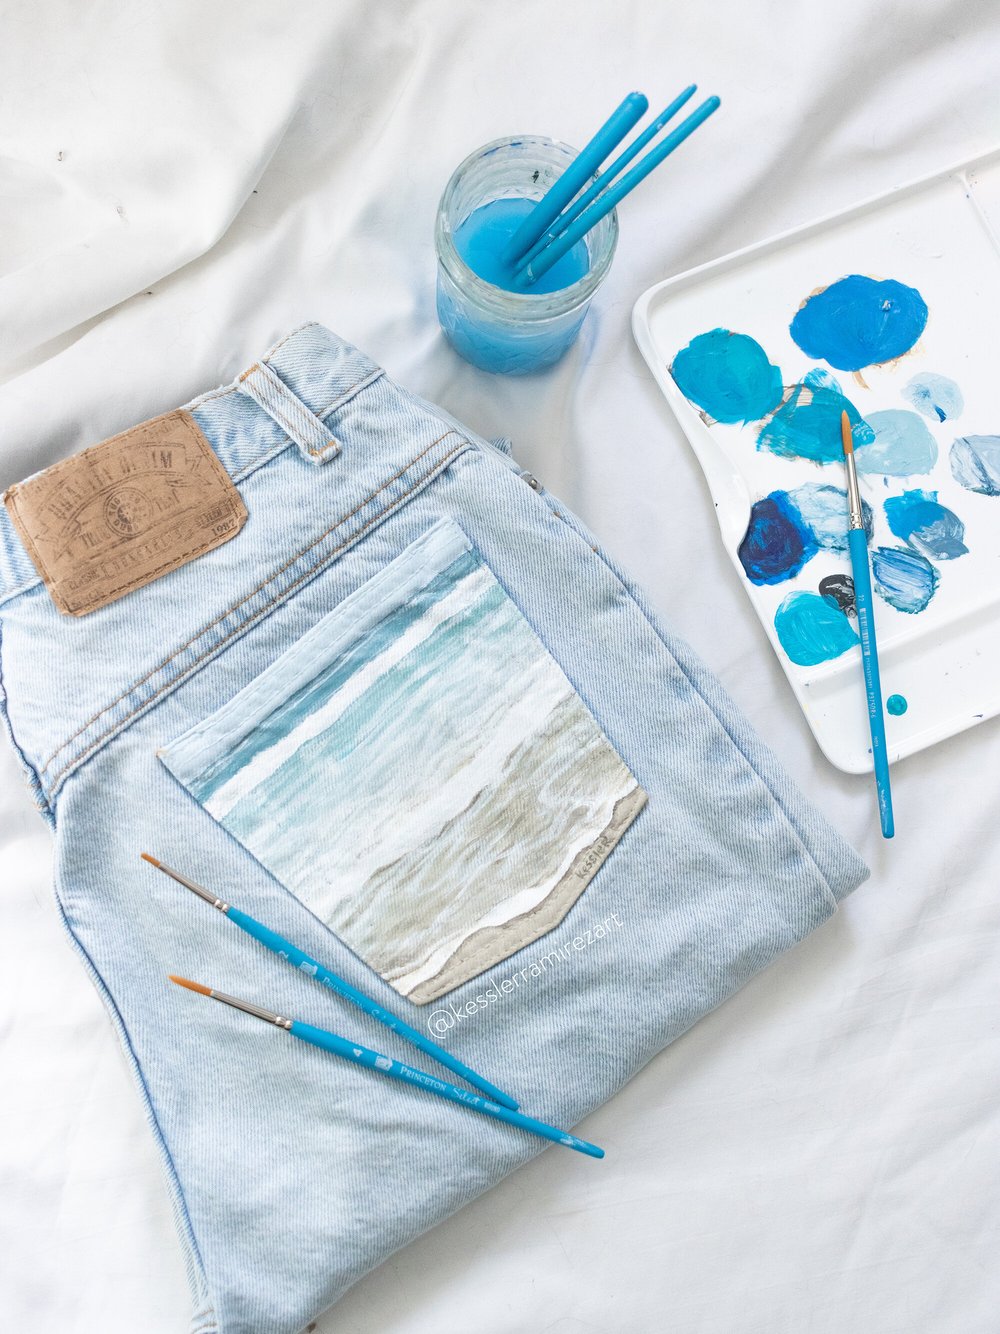 How to Paint on Denim: A Guide to DIY Jeans Painting with a Mushroom  Tutorial - Pillar Box Blue